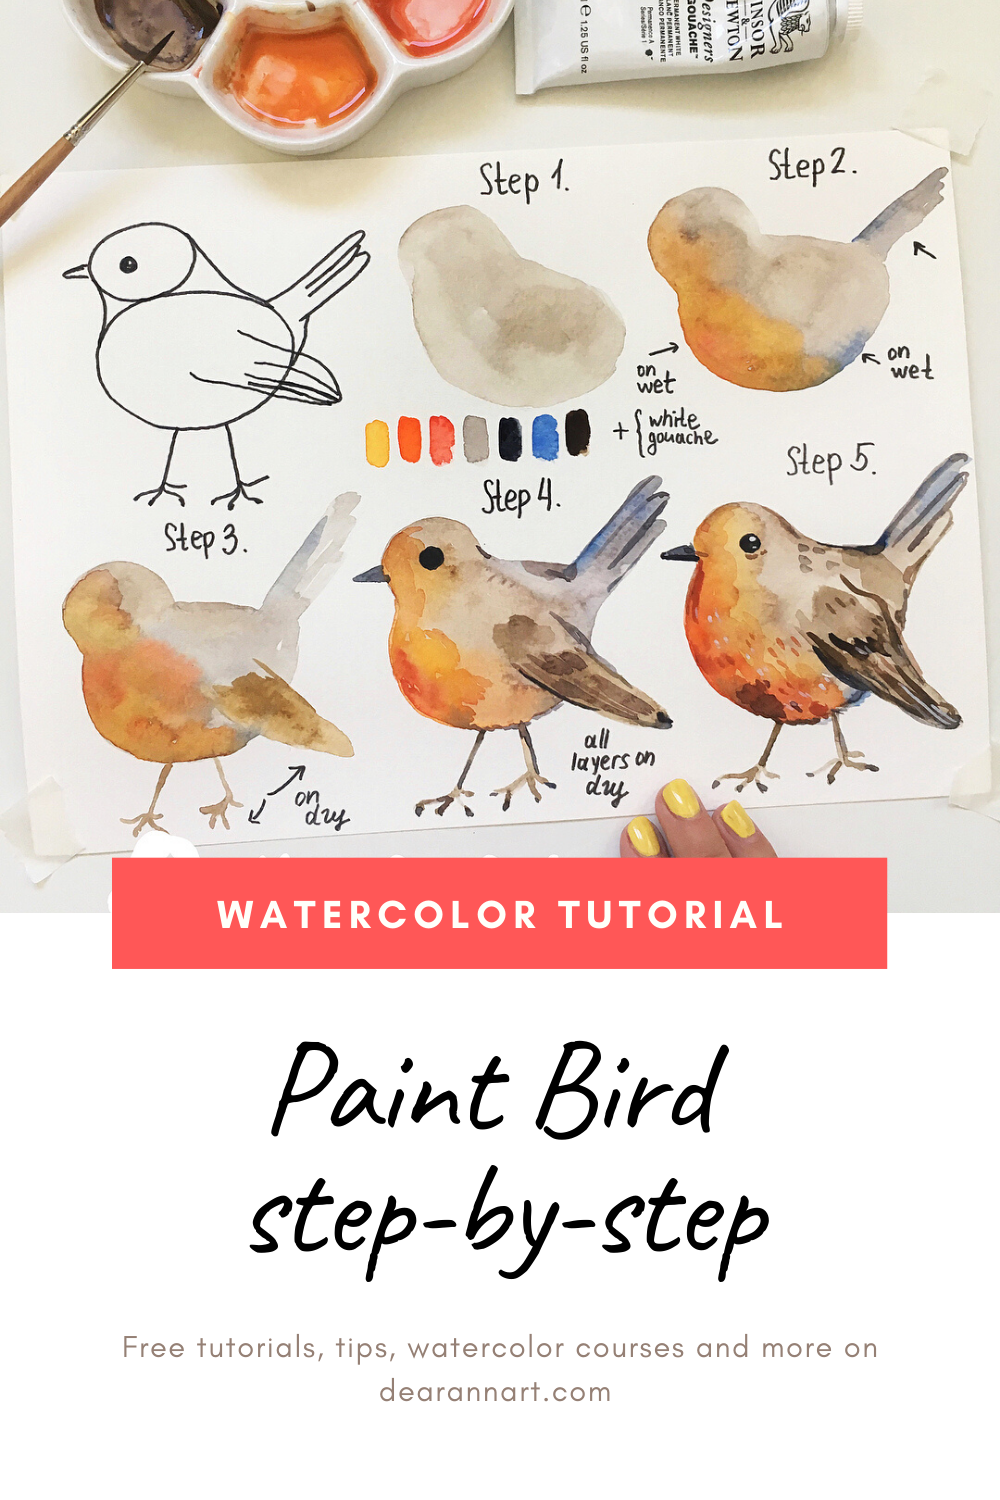 Learn Watercolor Step By Step: Paint a bird - Learn Watercolor Step By Step: Paint a bird -   13 diy Art watercolor ideas